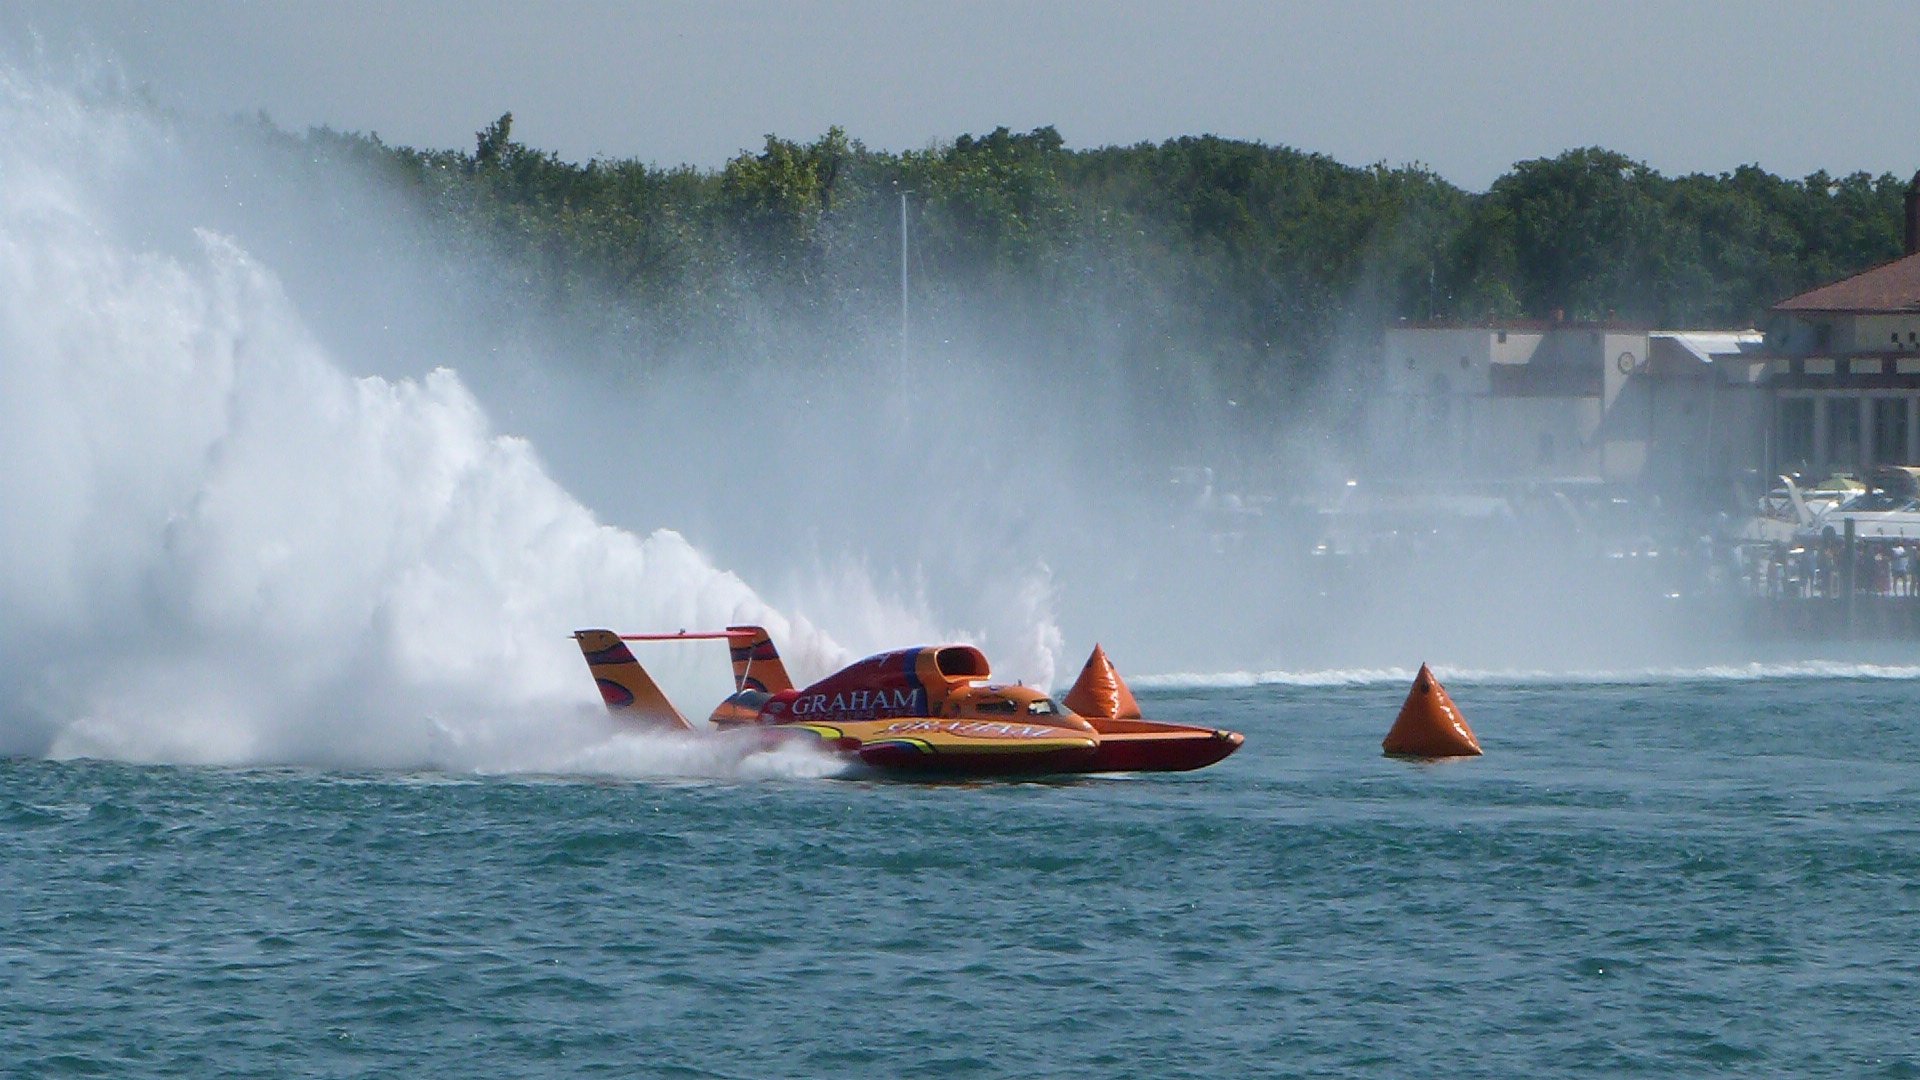 unlimited hydroplane, Race, Racing, Boat, Ship, Unlimited, Hydroplane, Jet,  1 Wallpaper